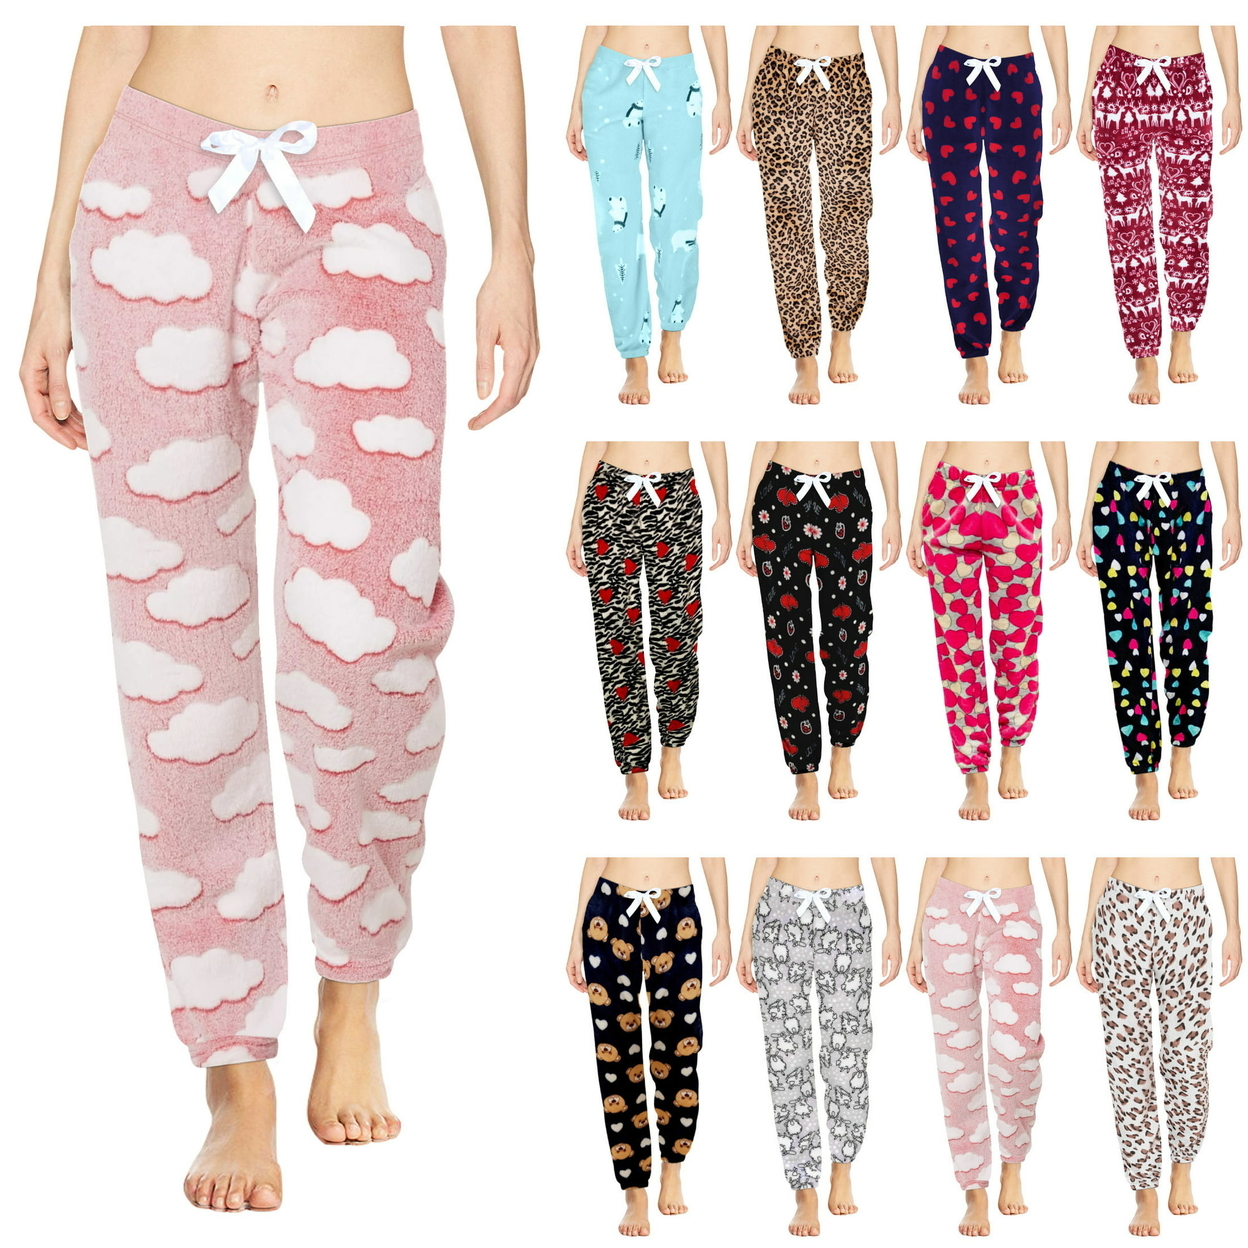 3-Pack: Women's Solid & Printed Ultra-Soft Comfy Stretch Micro-Fleece Pajama Lounge Pants - Large, Animal